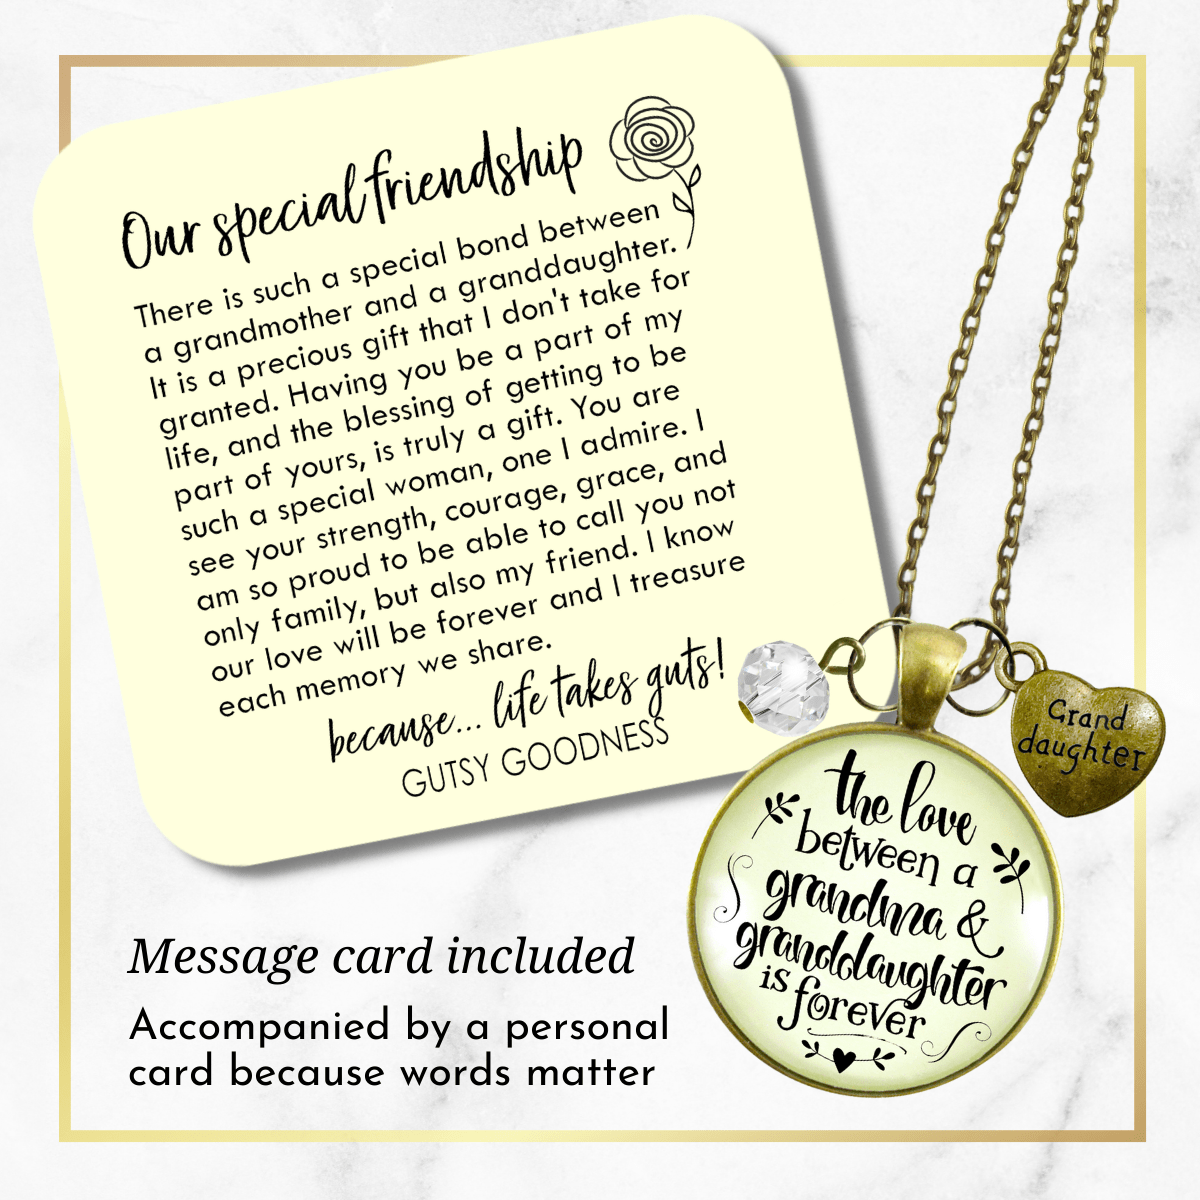 Gutsy Goodness To Granddaughter Necklace Love Between A Grandma Is Forever Quote Jewelry Gift - Gutsy Goodness Handmade Jewelry;To Granddaughter Necklace Love Between A Grandma Is Forever Quote Jewelry Gift - Gutsy Goodness Handmade Jewelry Gifts